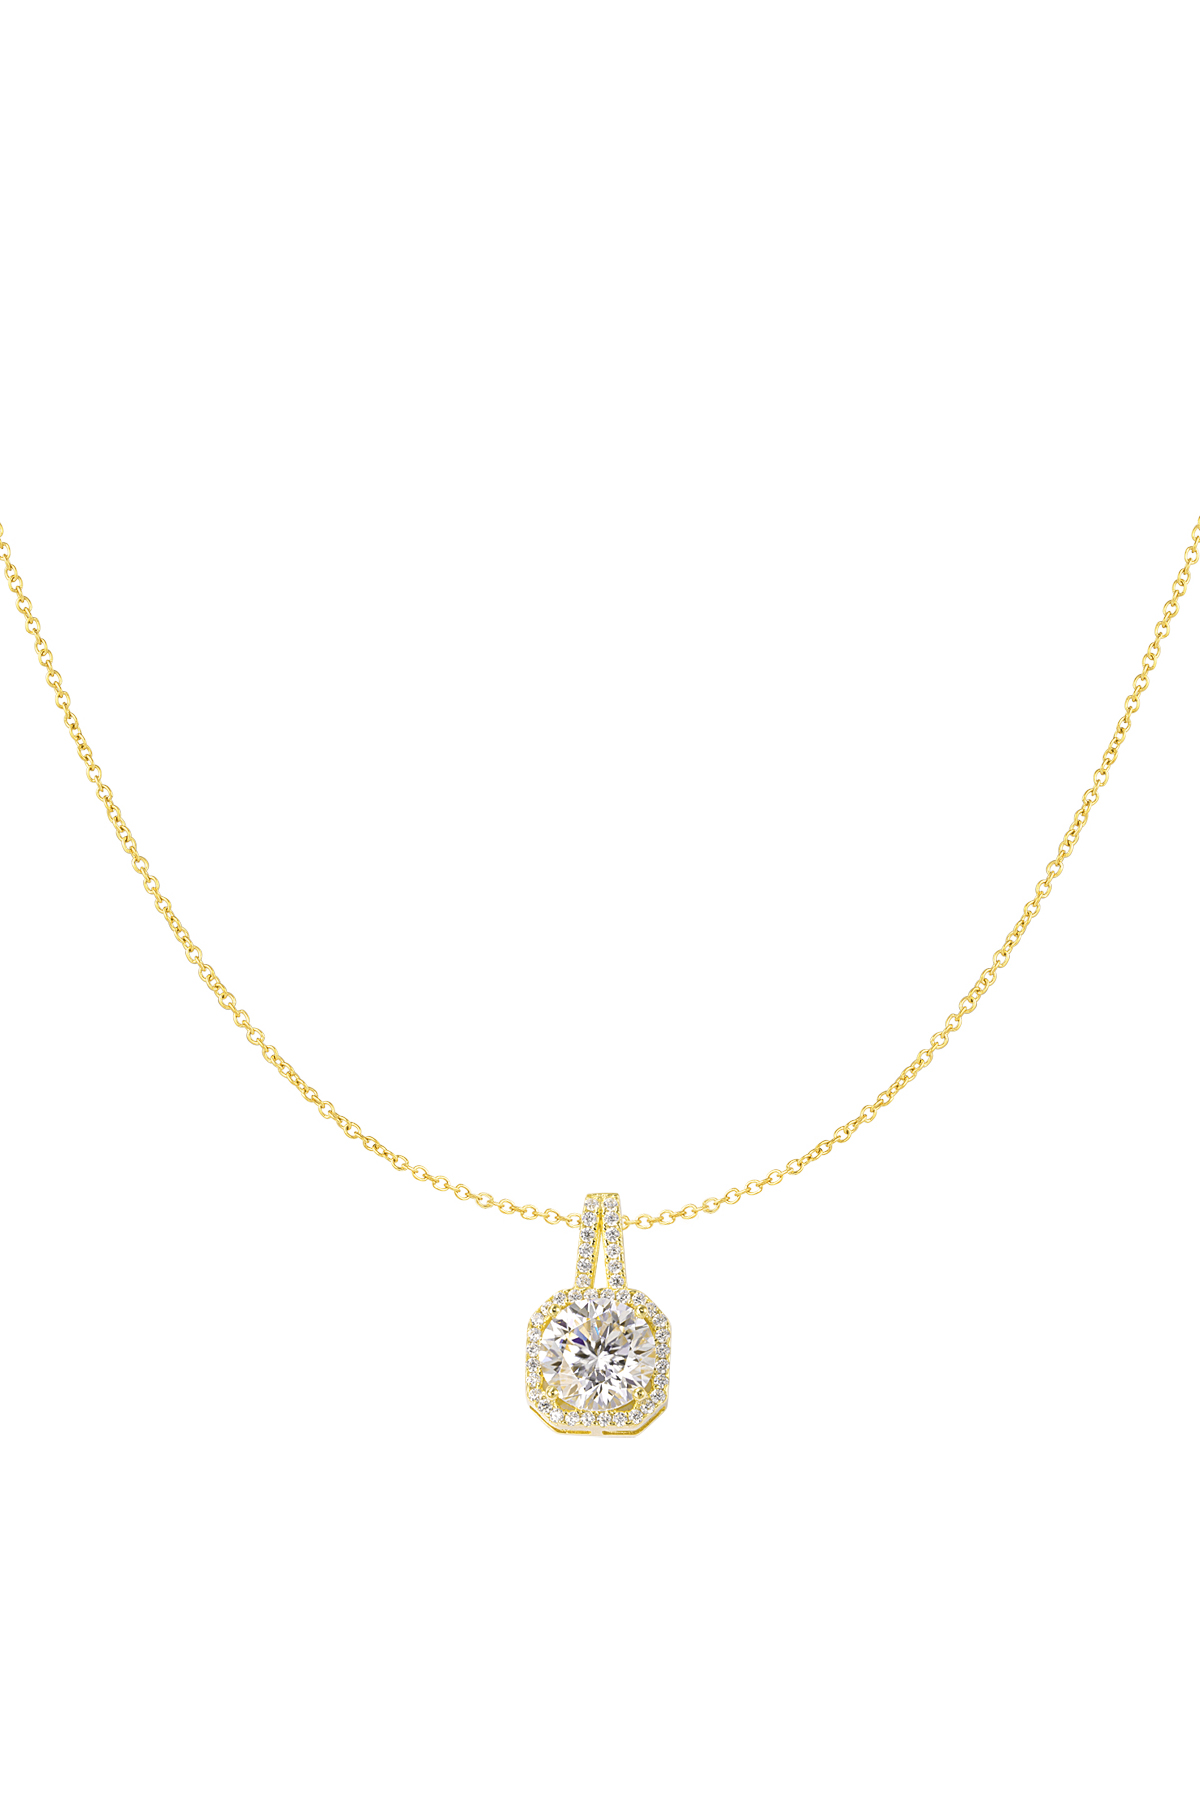 Necklace square stone - gold h5 